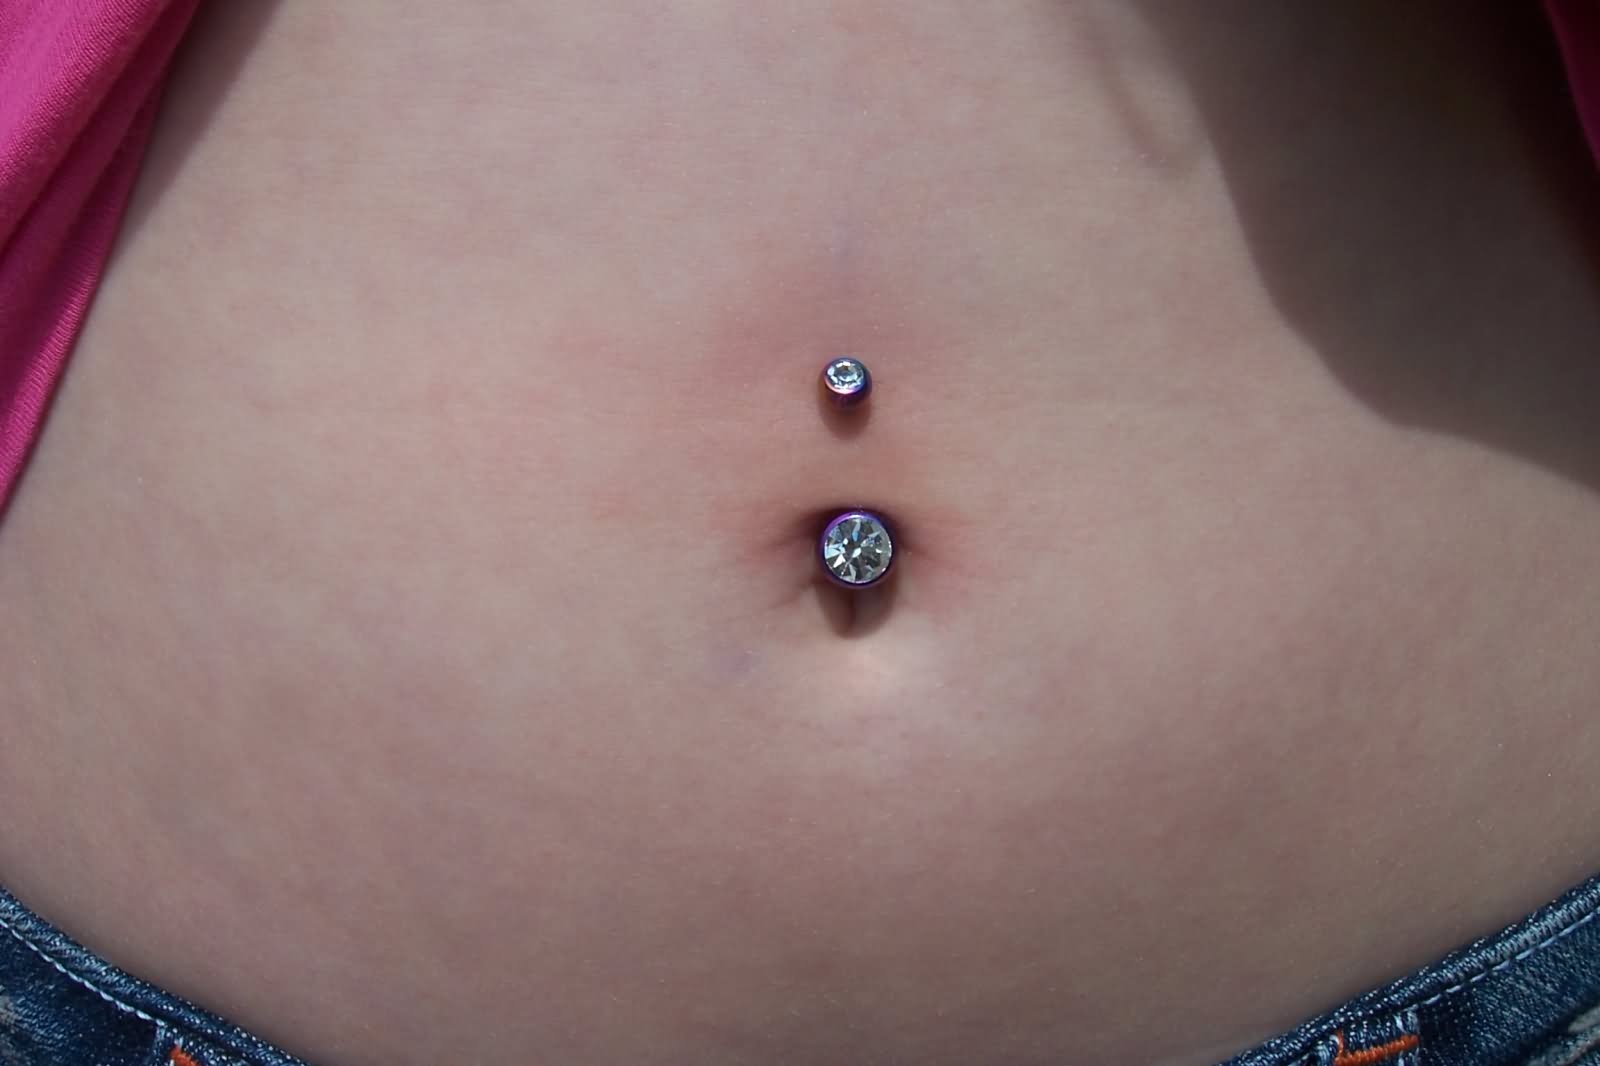 Inverse Belly Piercing Image For Women